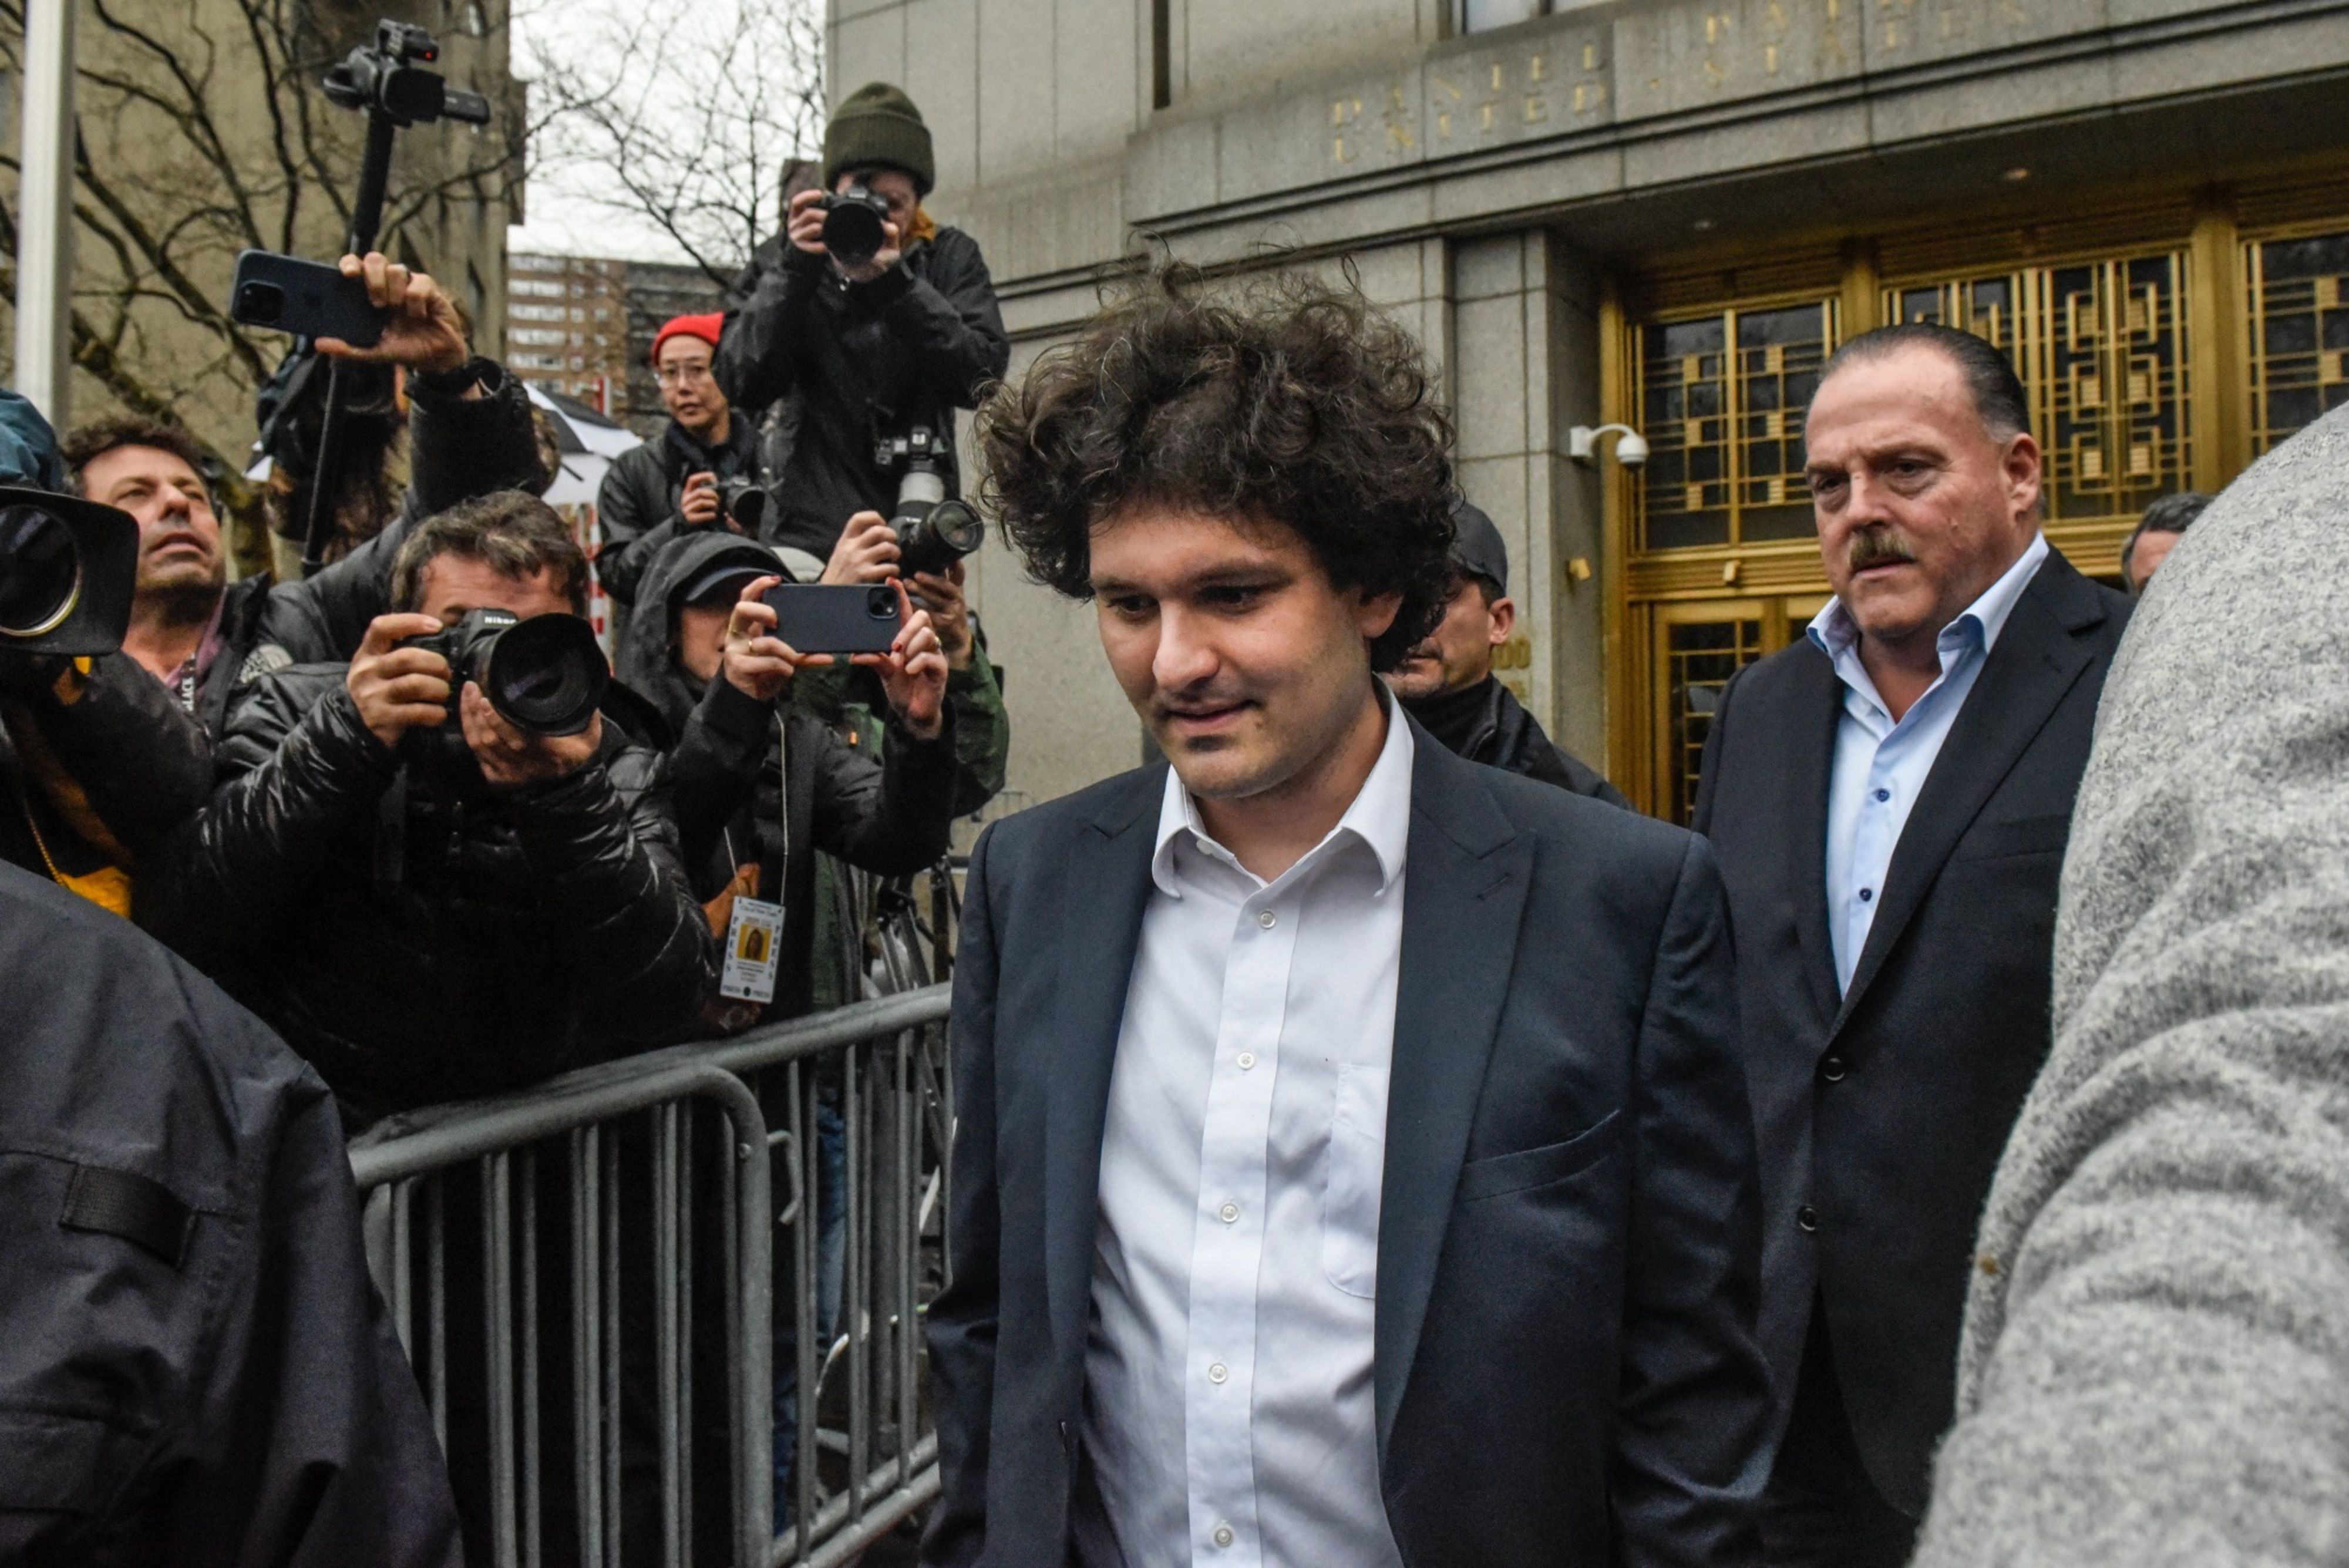 Sam Bankman-Fried, co-founder of FTX Cryptocurrency Derivatives Exchange, departs from court in New York, US, on Tuesday, Jan 3, 2023. Bankman-Fried pleaded not guilty to criminal charges Tuesday and is set to face a trial in October, a courtroom showdown likely to be one of the highest-profile white-collar fraud cases in recent years. (Bloomberg)